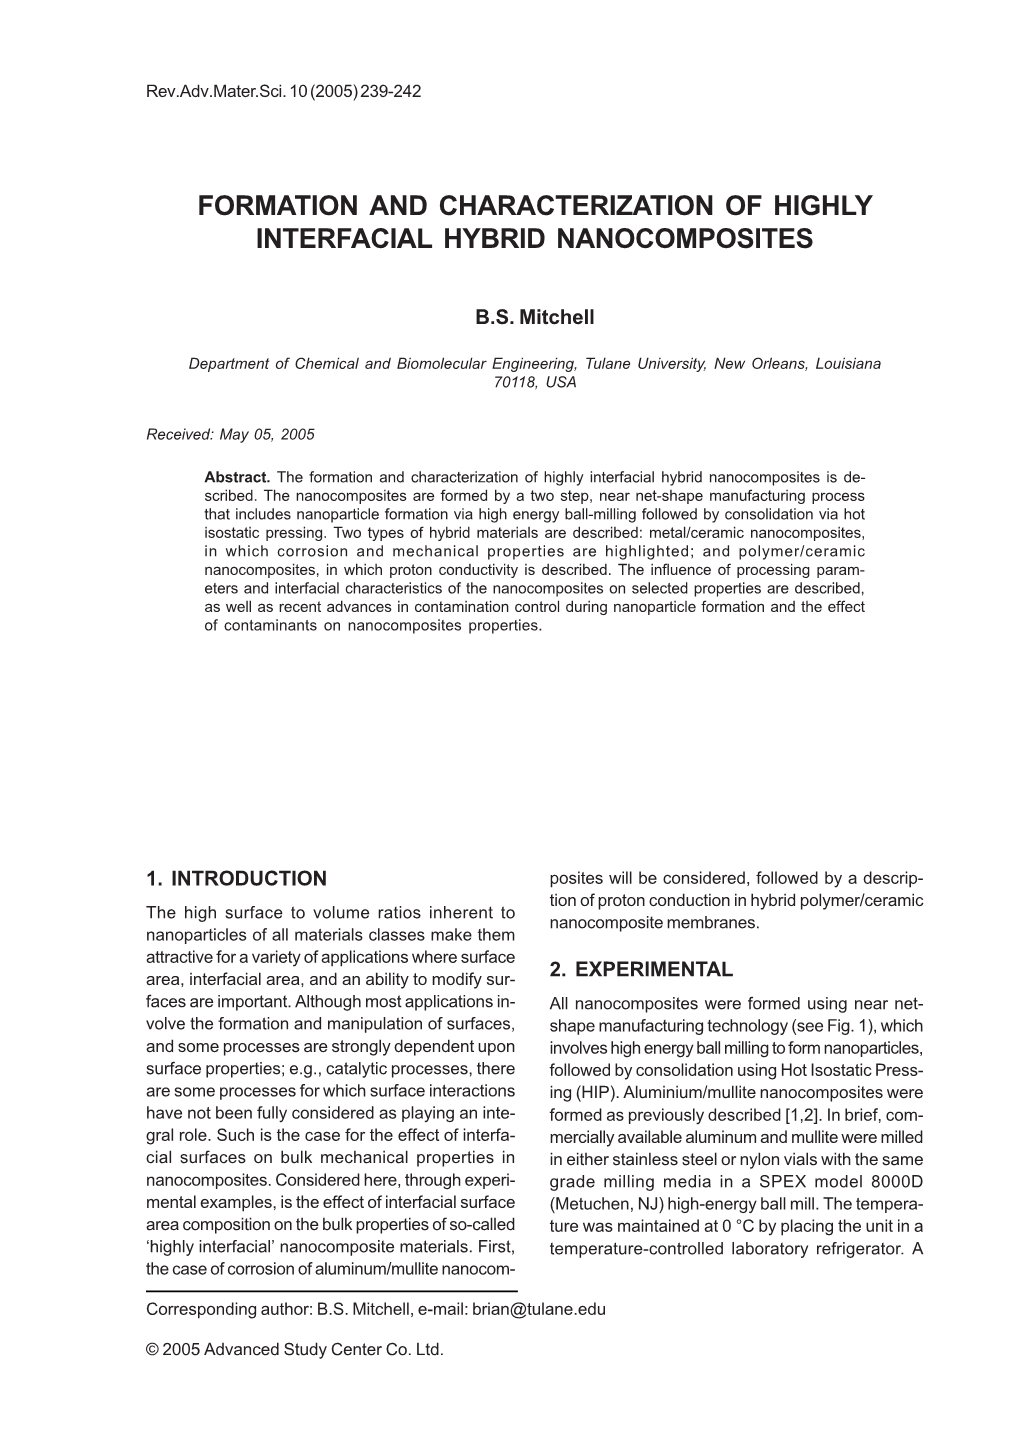 Formation and Characterization of Highly Interfacial Hybrid Nanocomposites